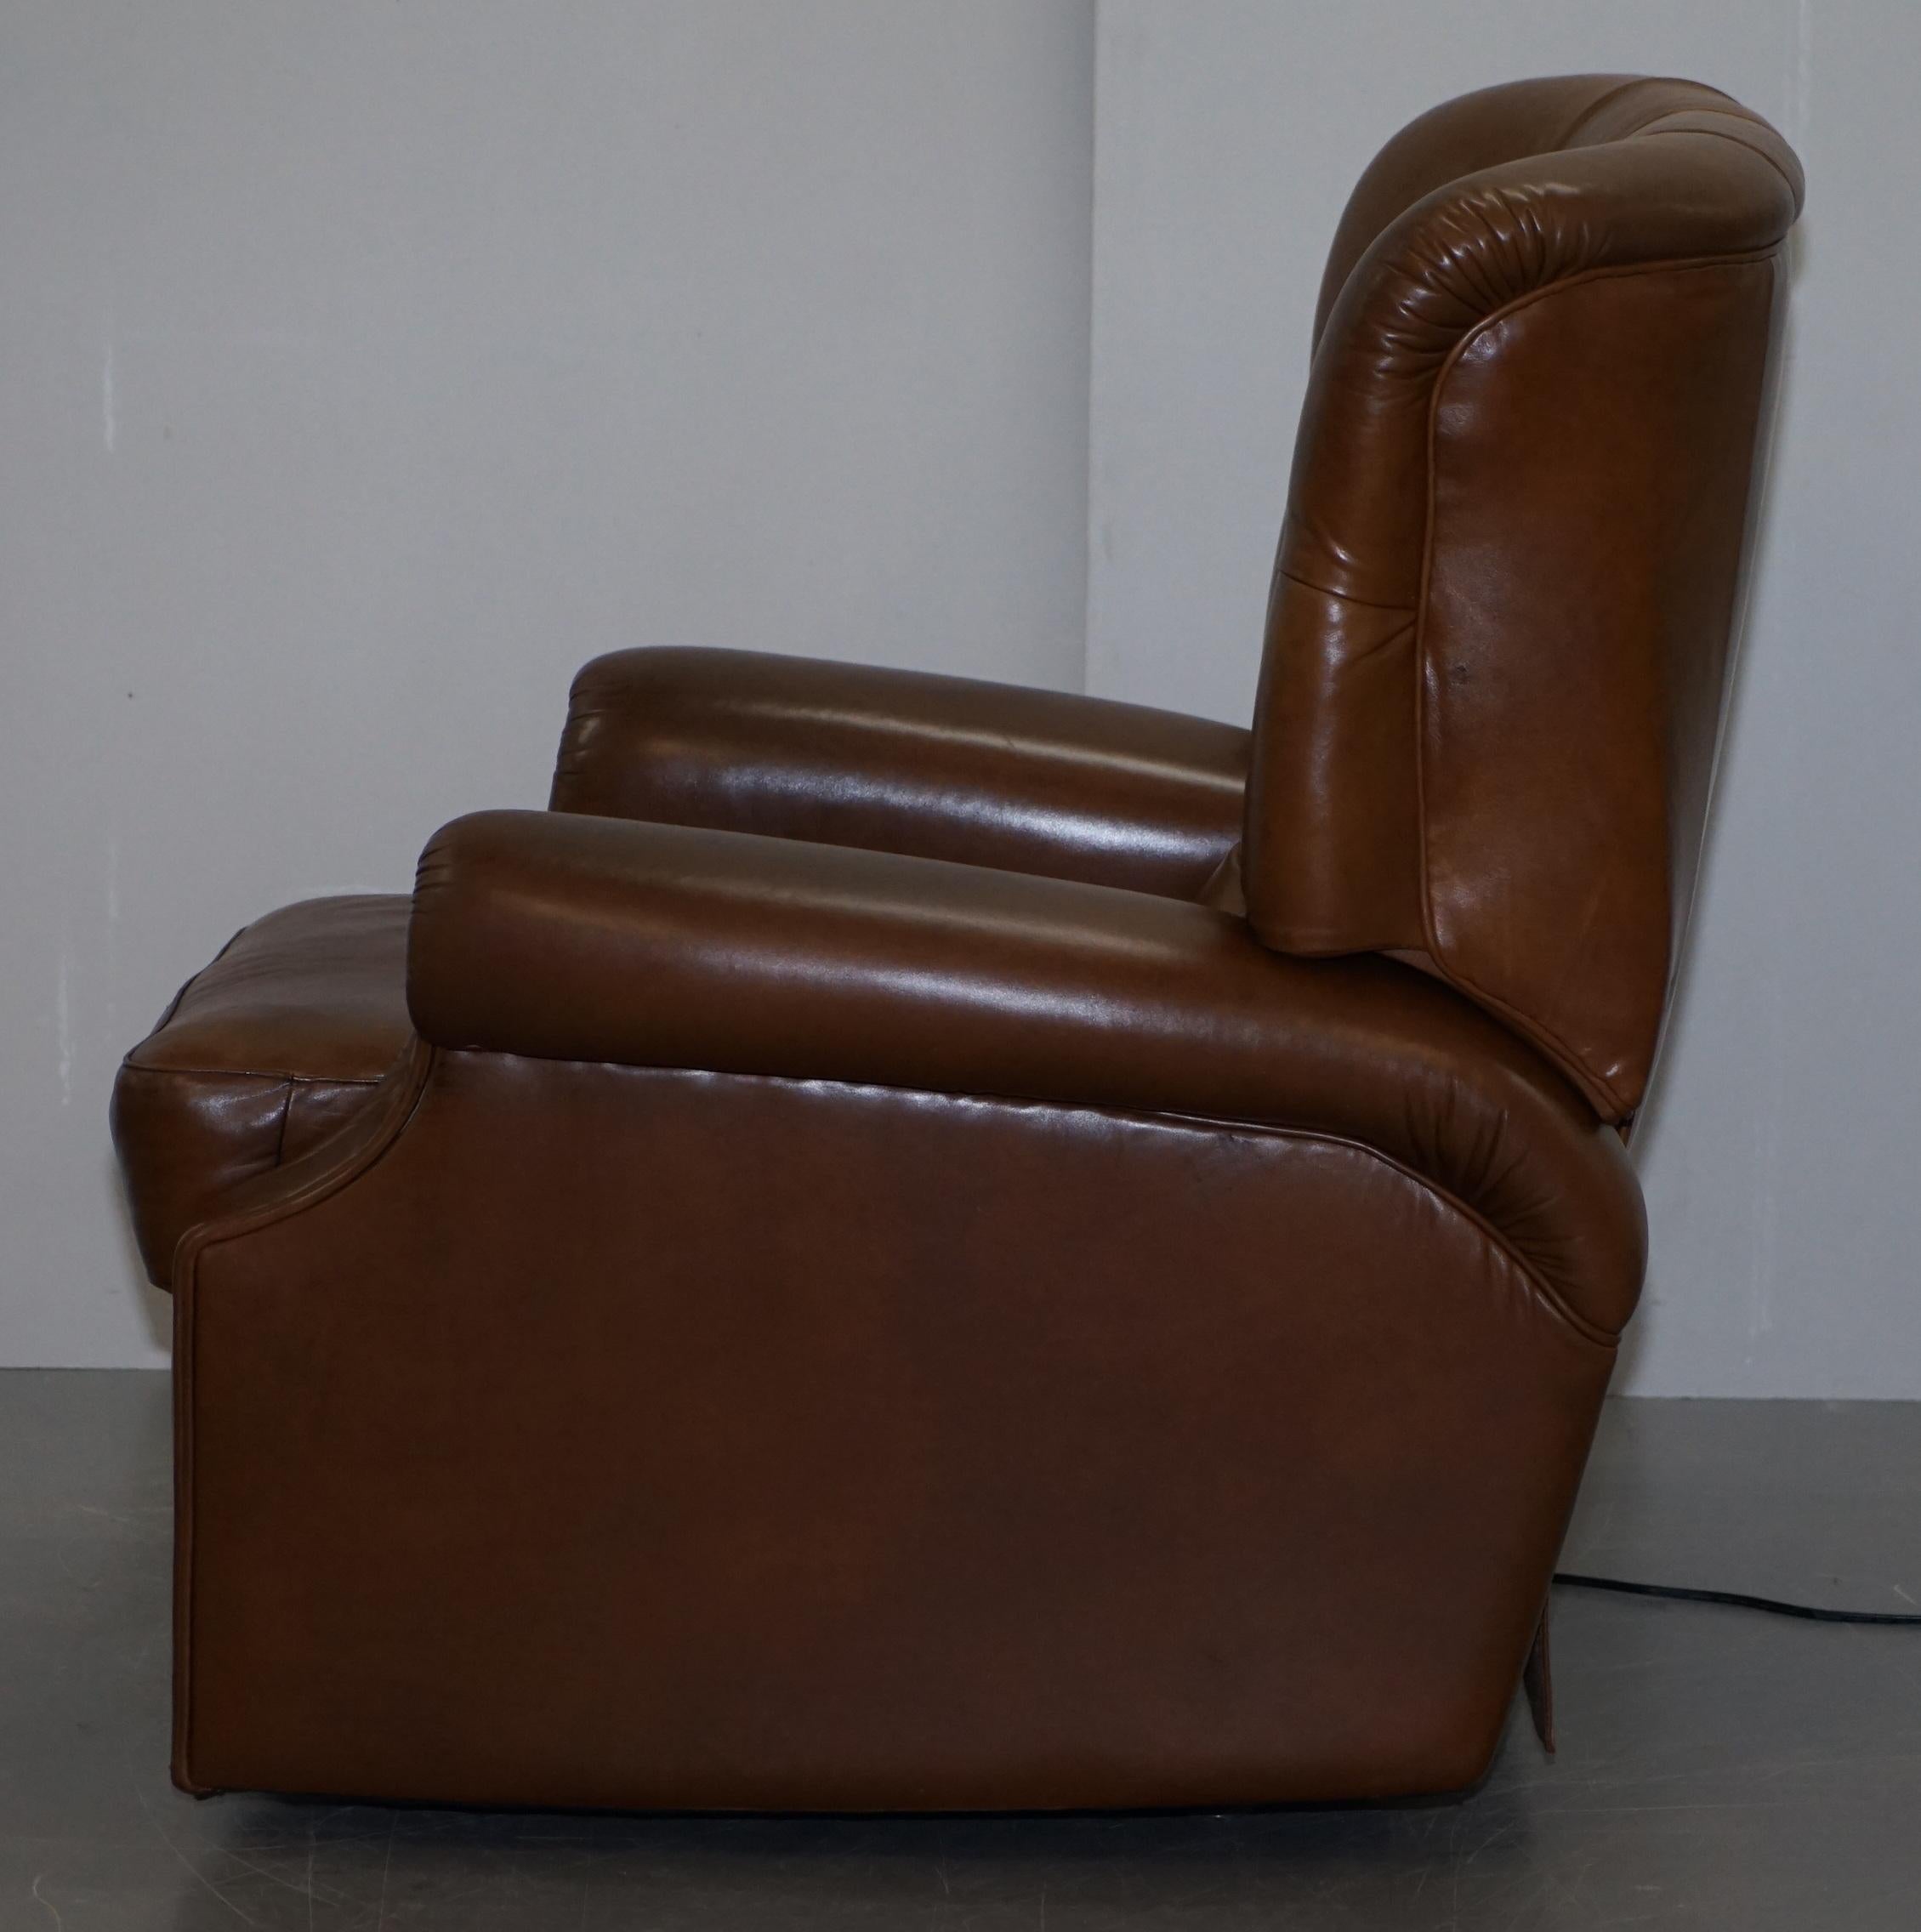 Lovely Tan Brown Leather Chesterfield Electric Relciner Armchair Comfortable!!!! 7